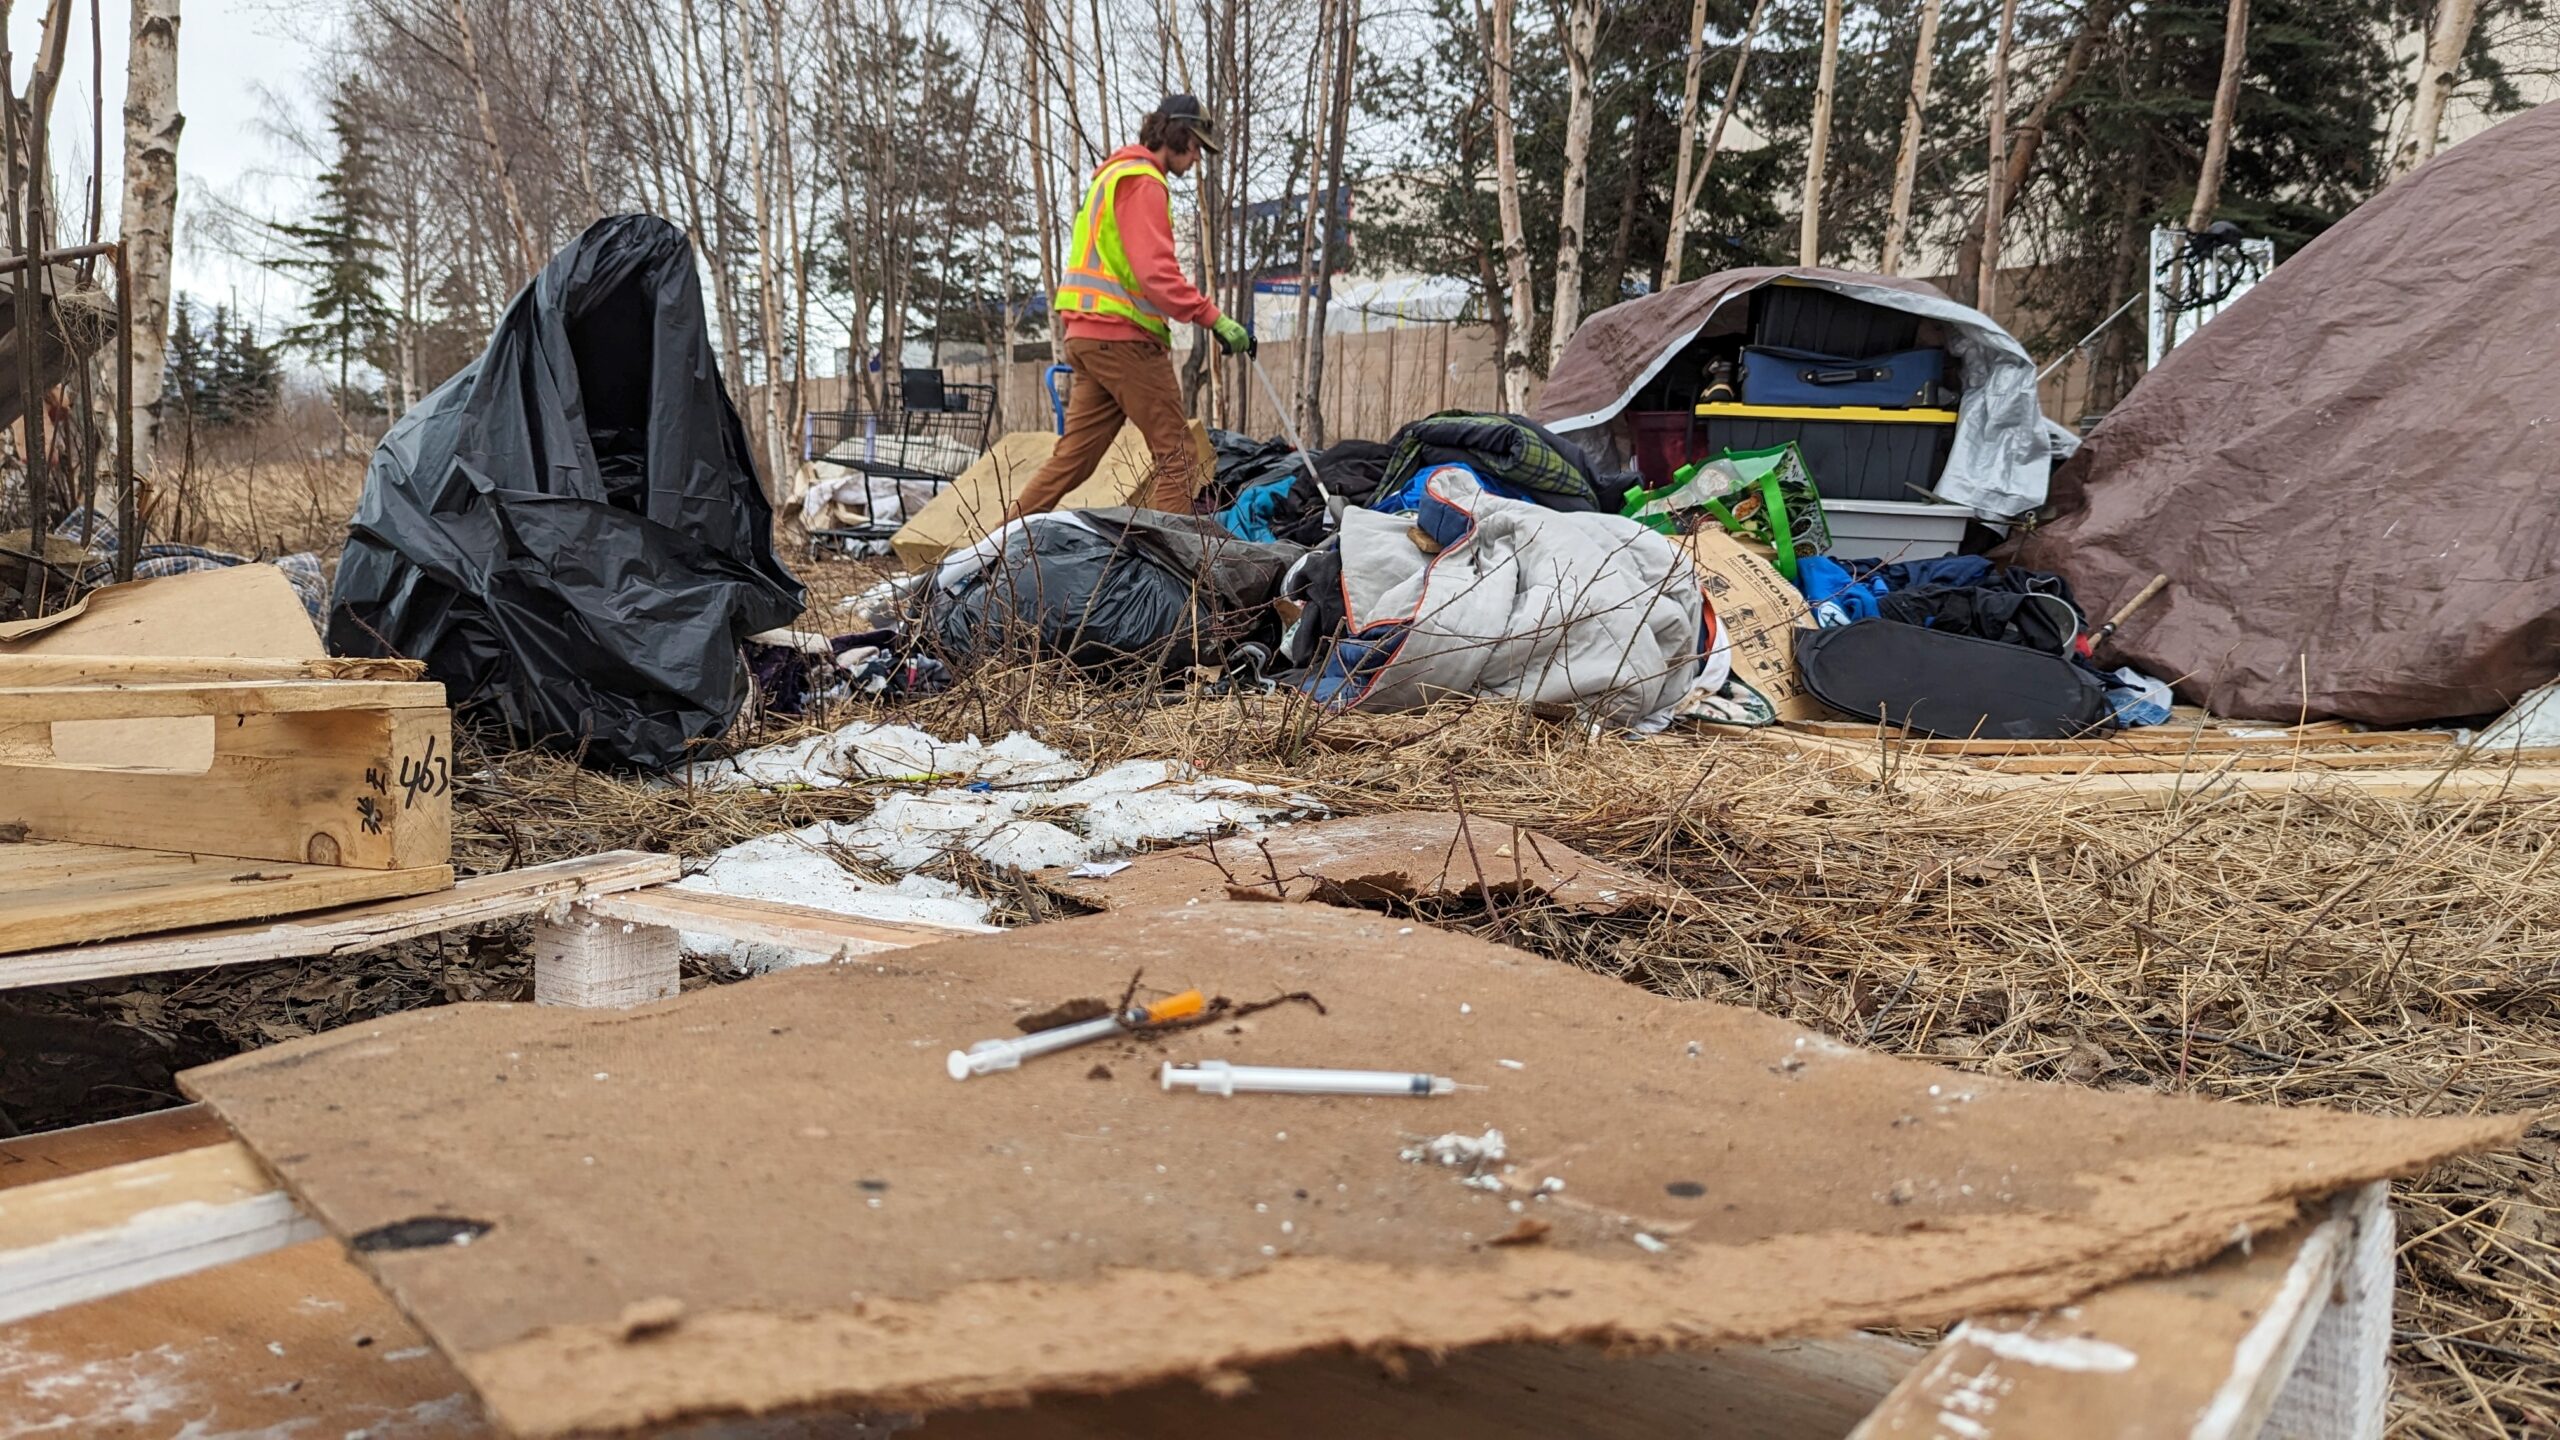 A man in a reflective vest picks uses a trash picker around tarps, tents and needles.